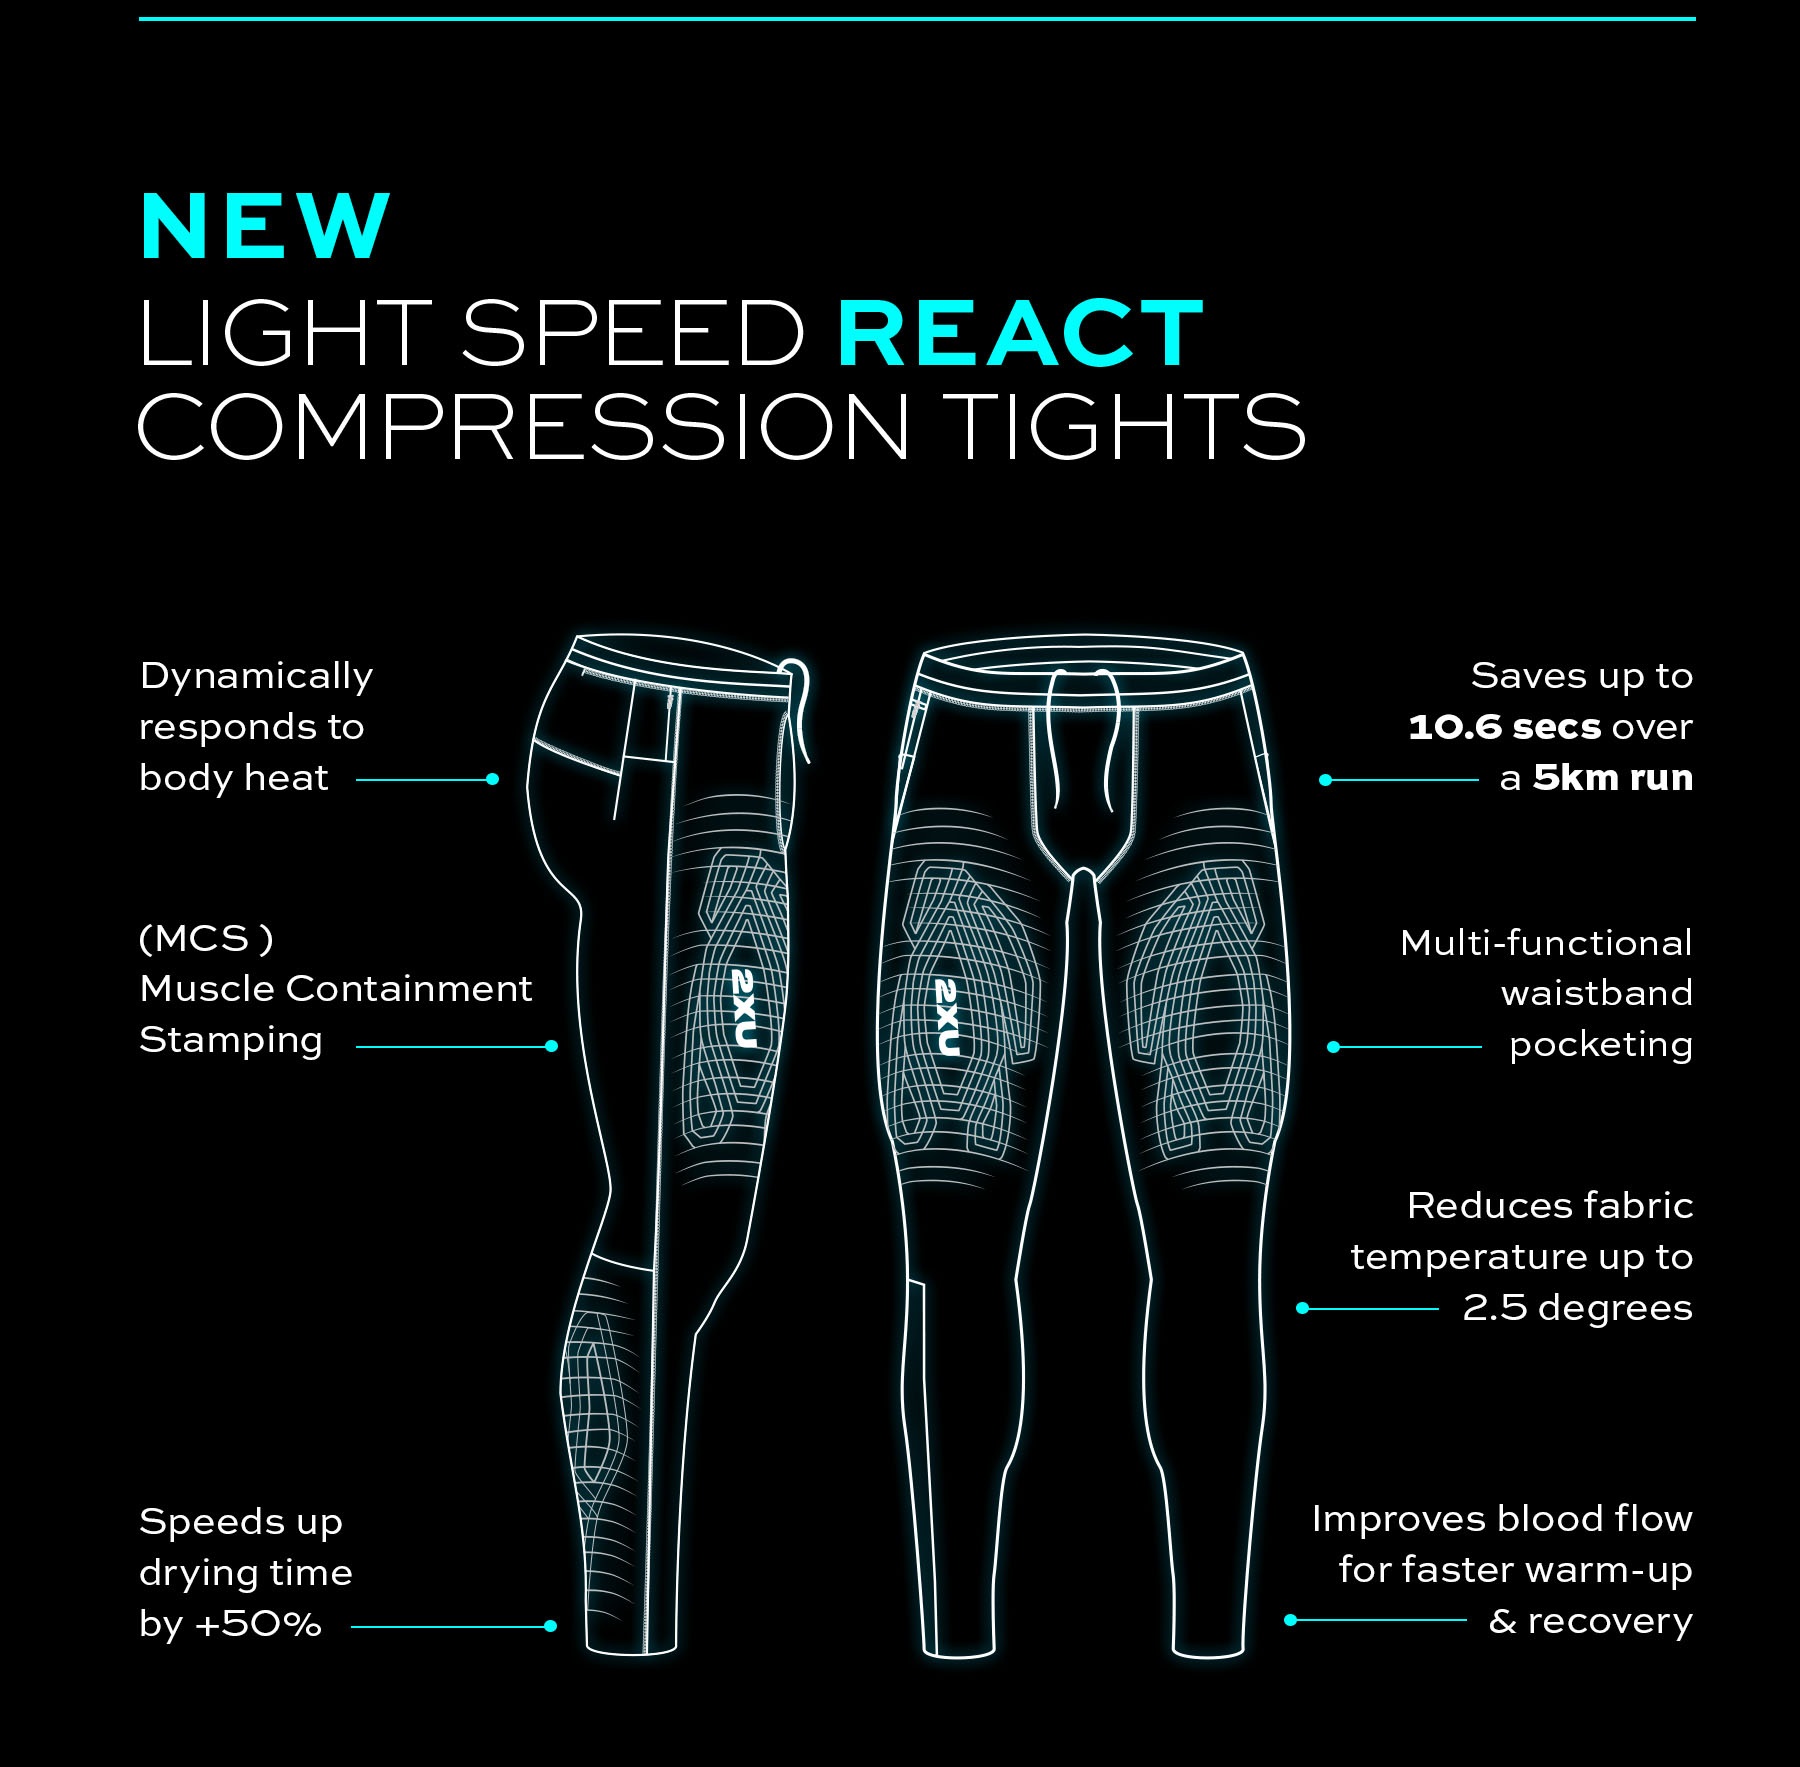 Power Your Pace: Elevate every mile with 2XU's Light Speed